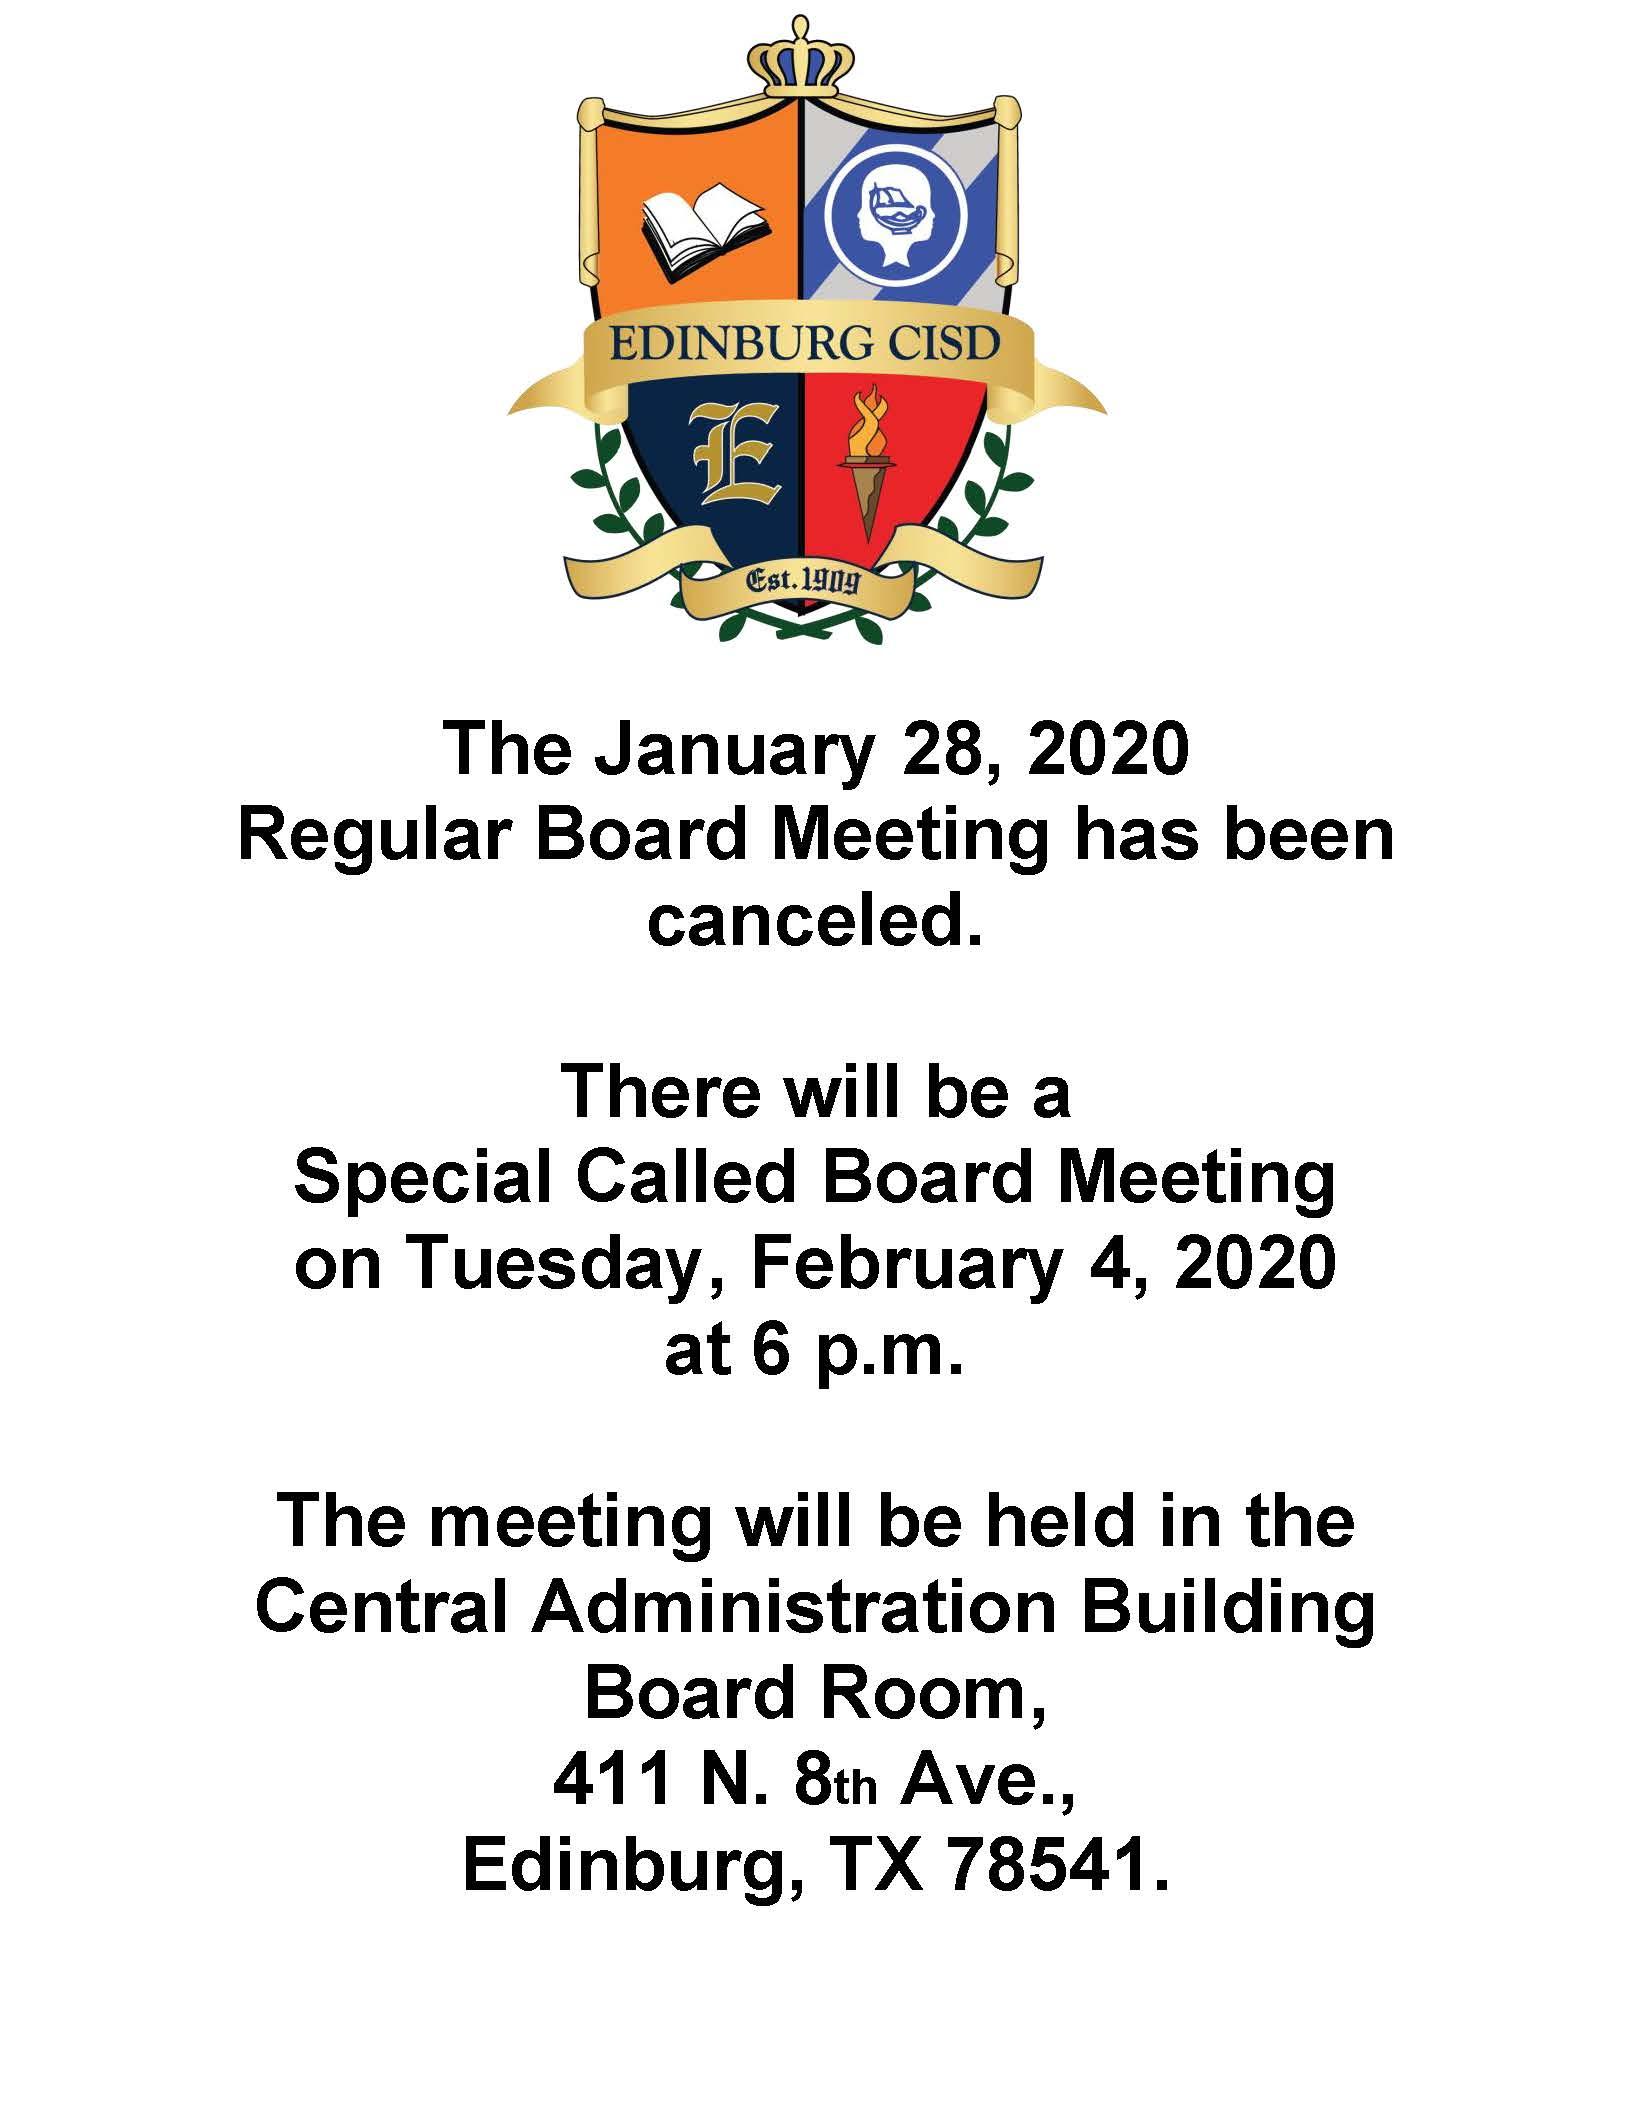 The January 28, 2020 Regular Board Meeting has been canceled. There will be a Special Called Board Meeting on Tuesday, February 4, 2020 at 6 p.m. The meeting will be held in the Central Administration Building Board Room, 411 N. 8th Ave., Edinburg, TX 78541.